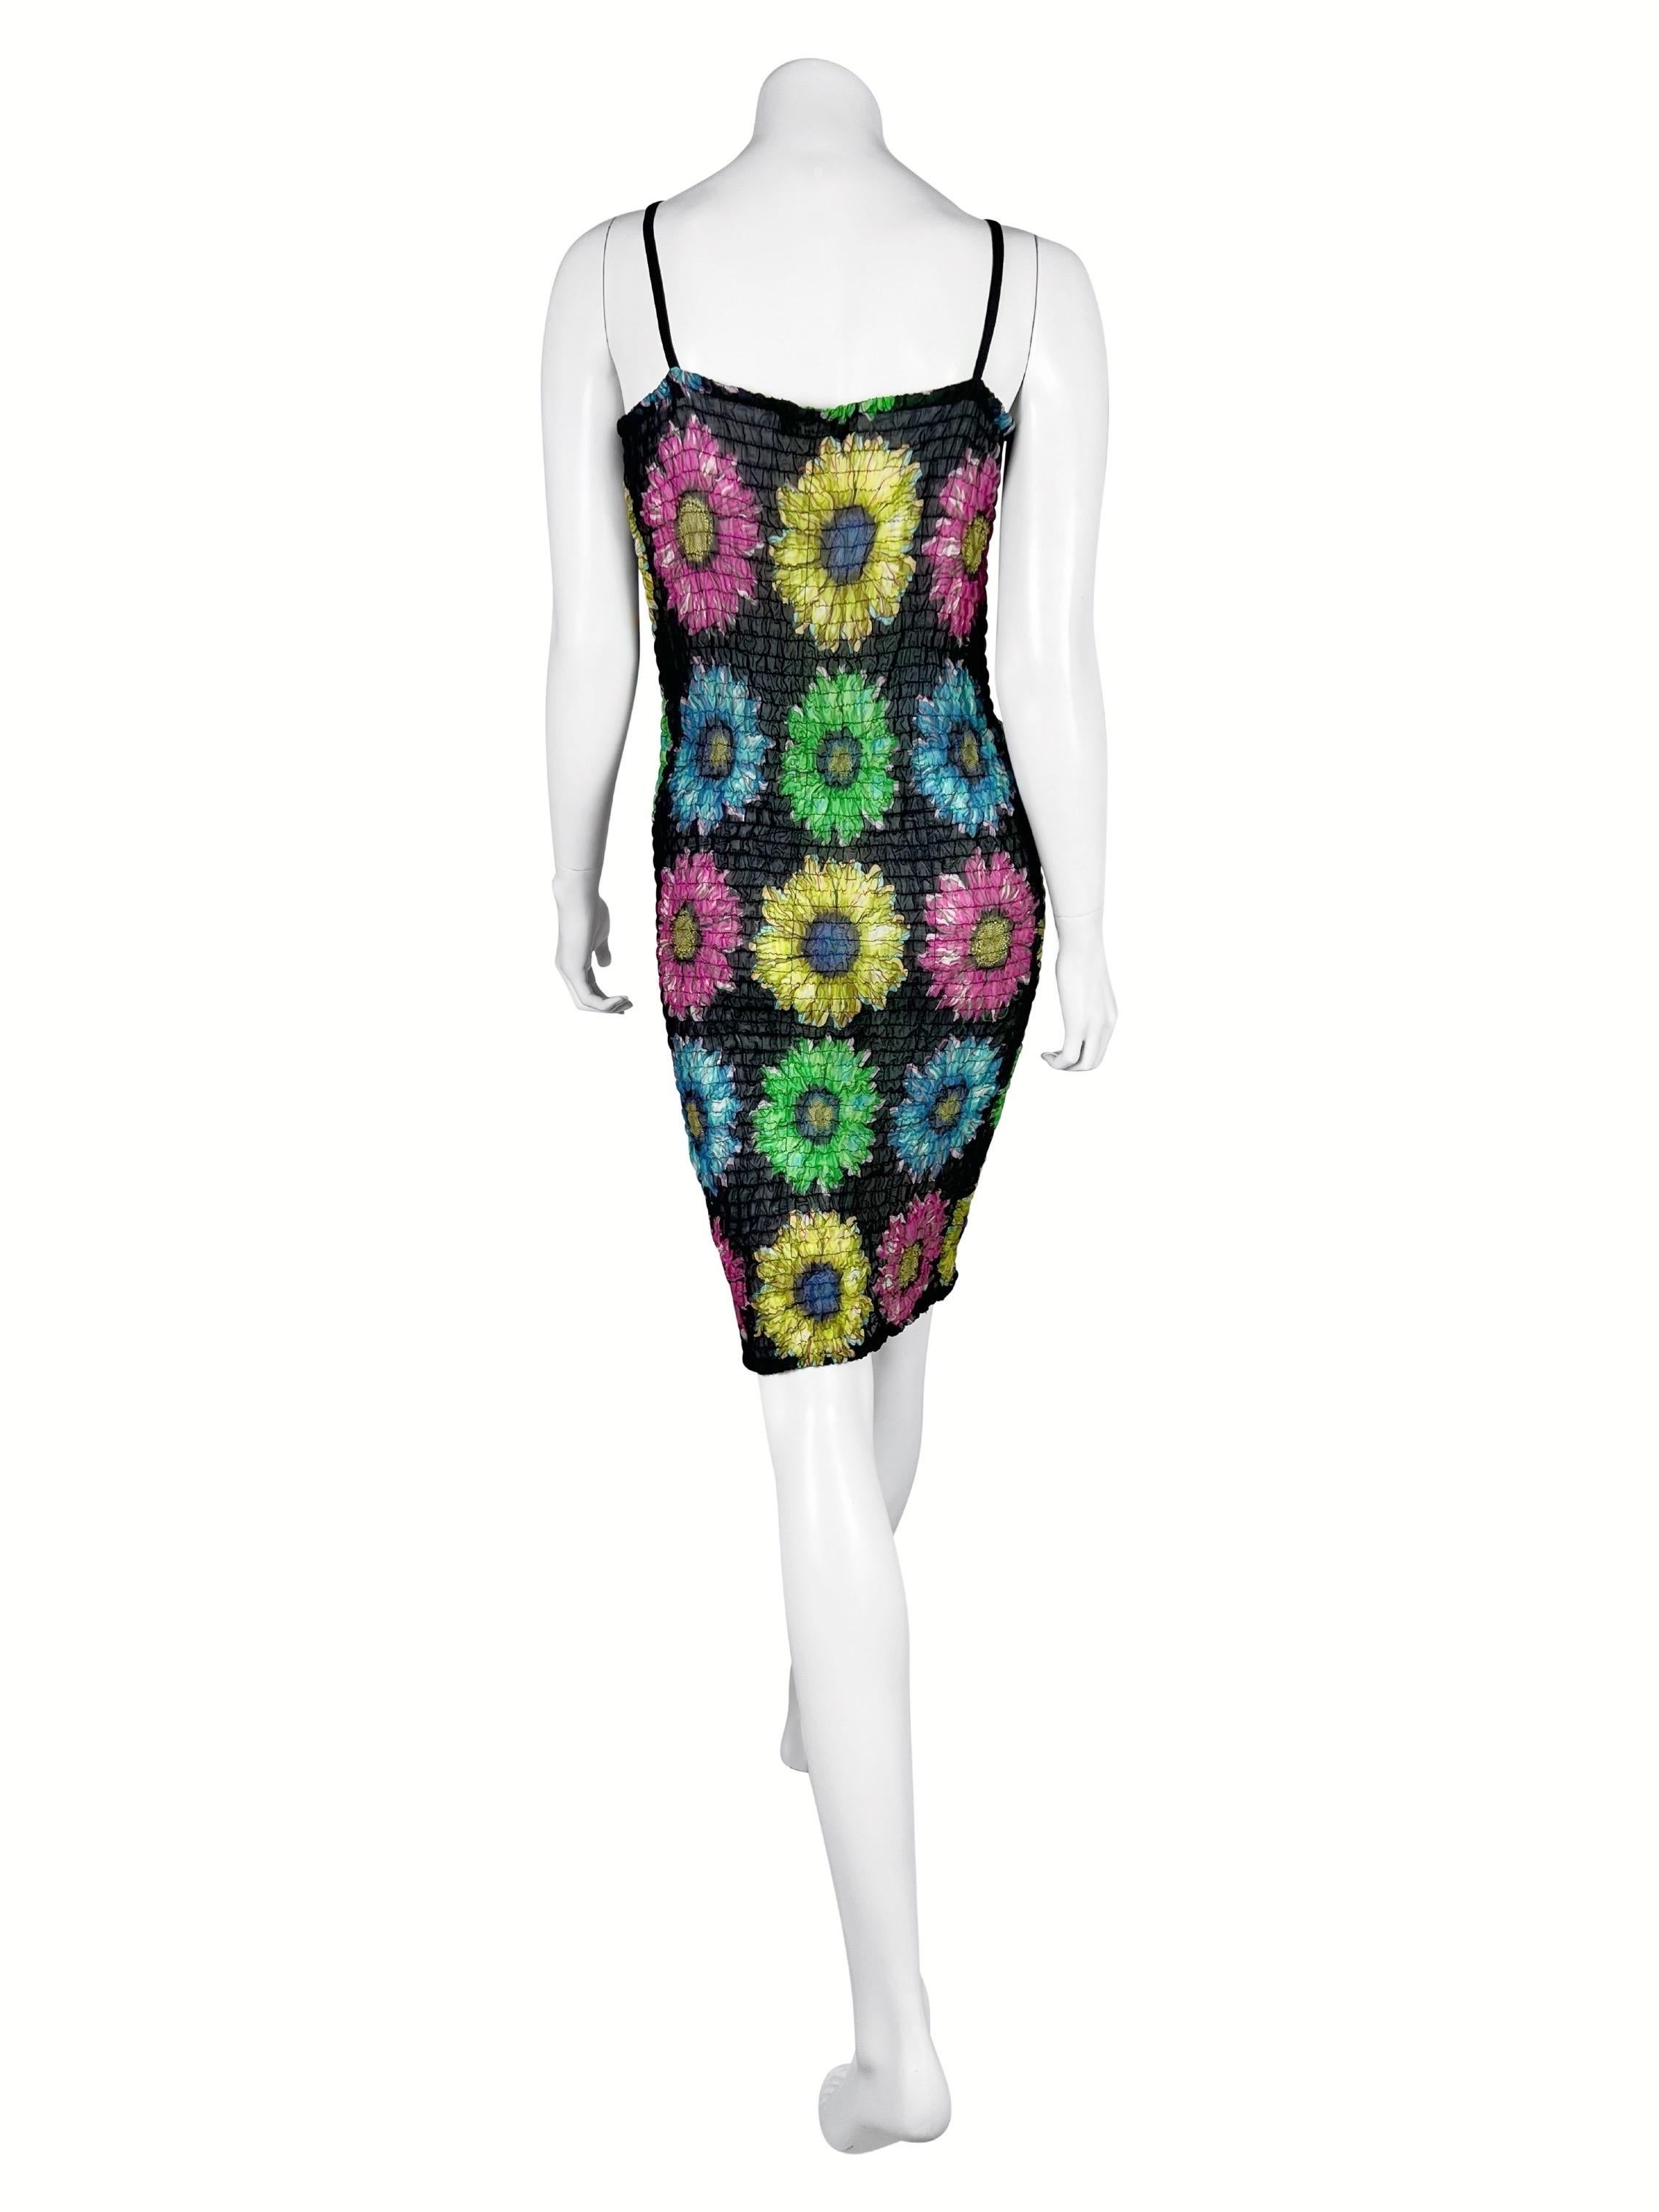 SS 2002 Versace by Donatella Versace Sheer Sunflower Print Dress For Sale 1